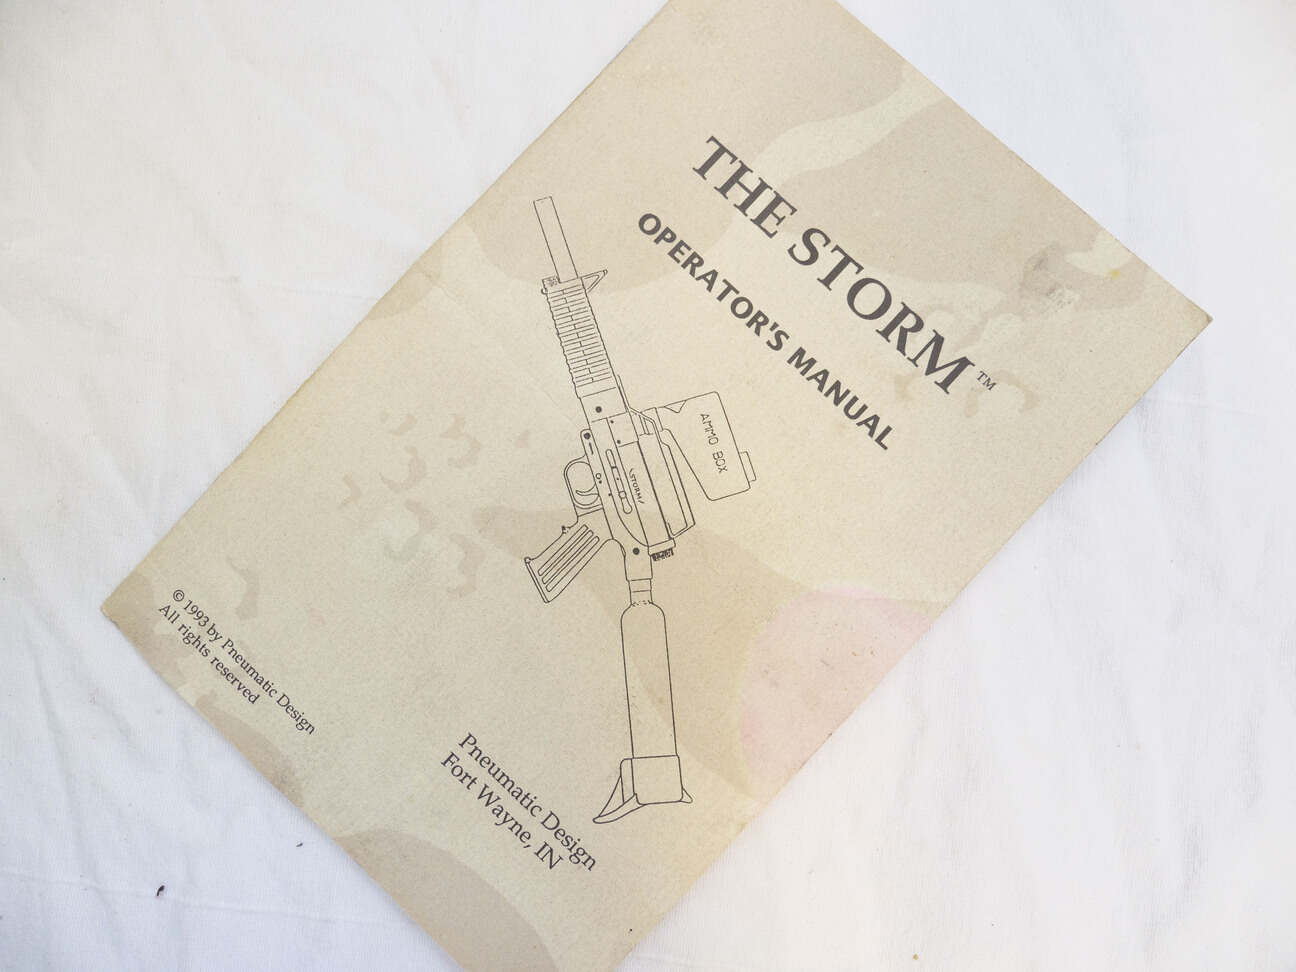 Stom semi automatic operators manual, old and stained shape, mid 90s